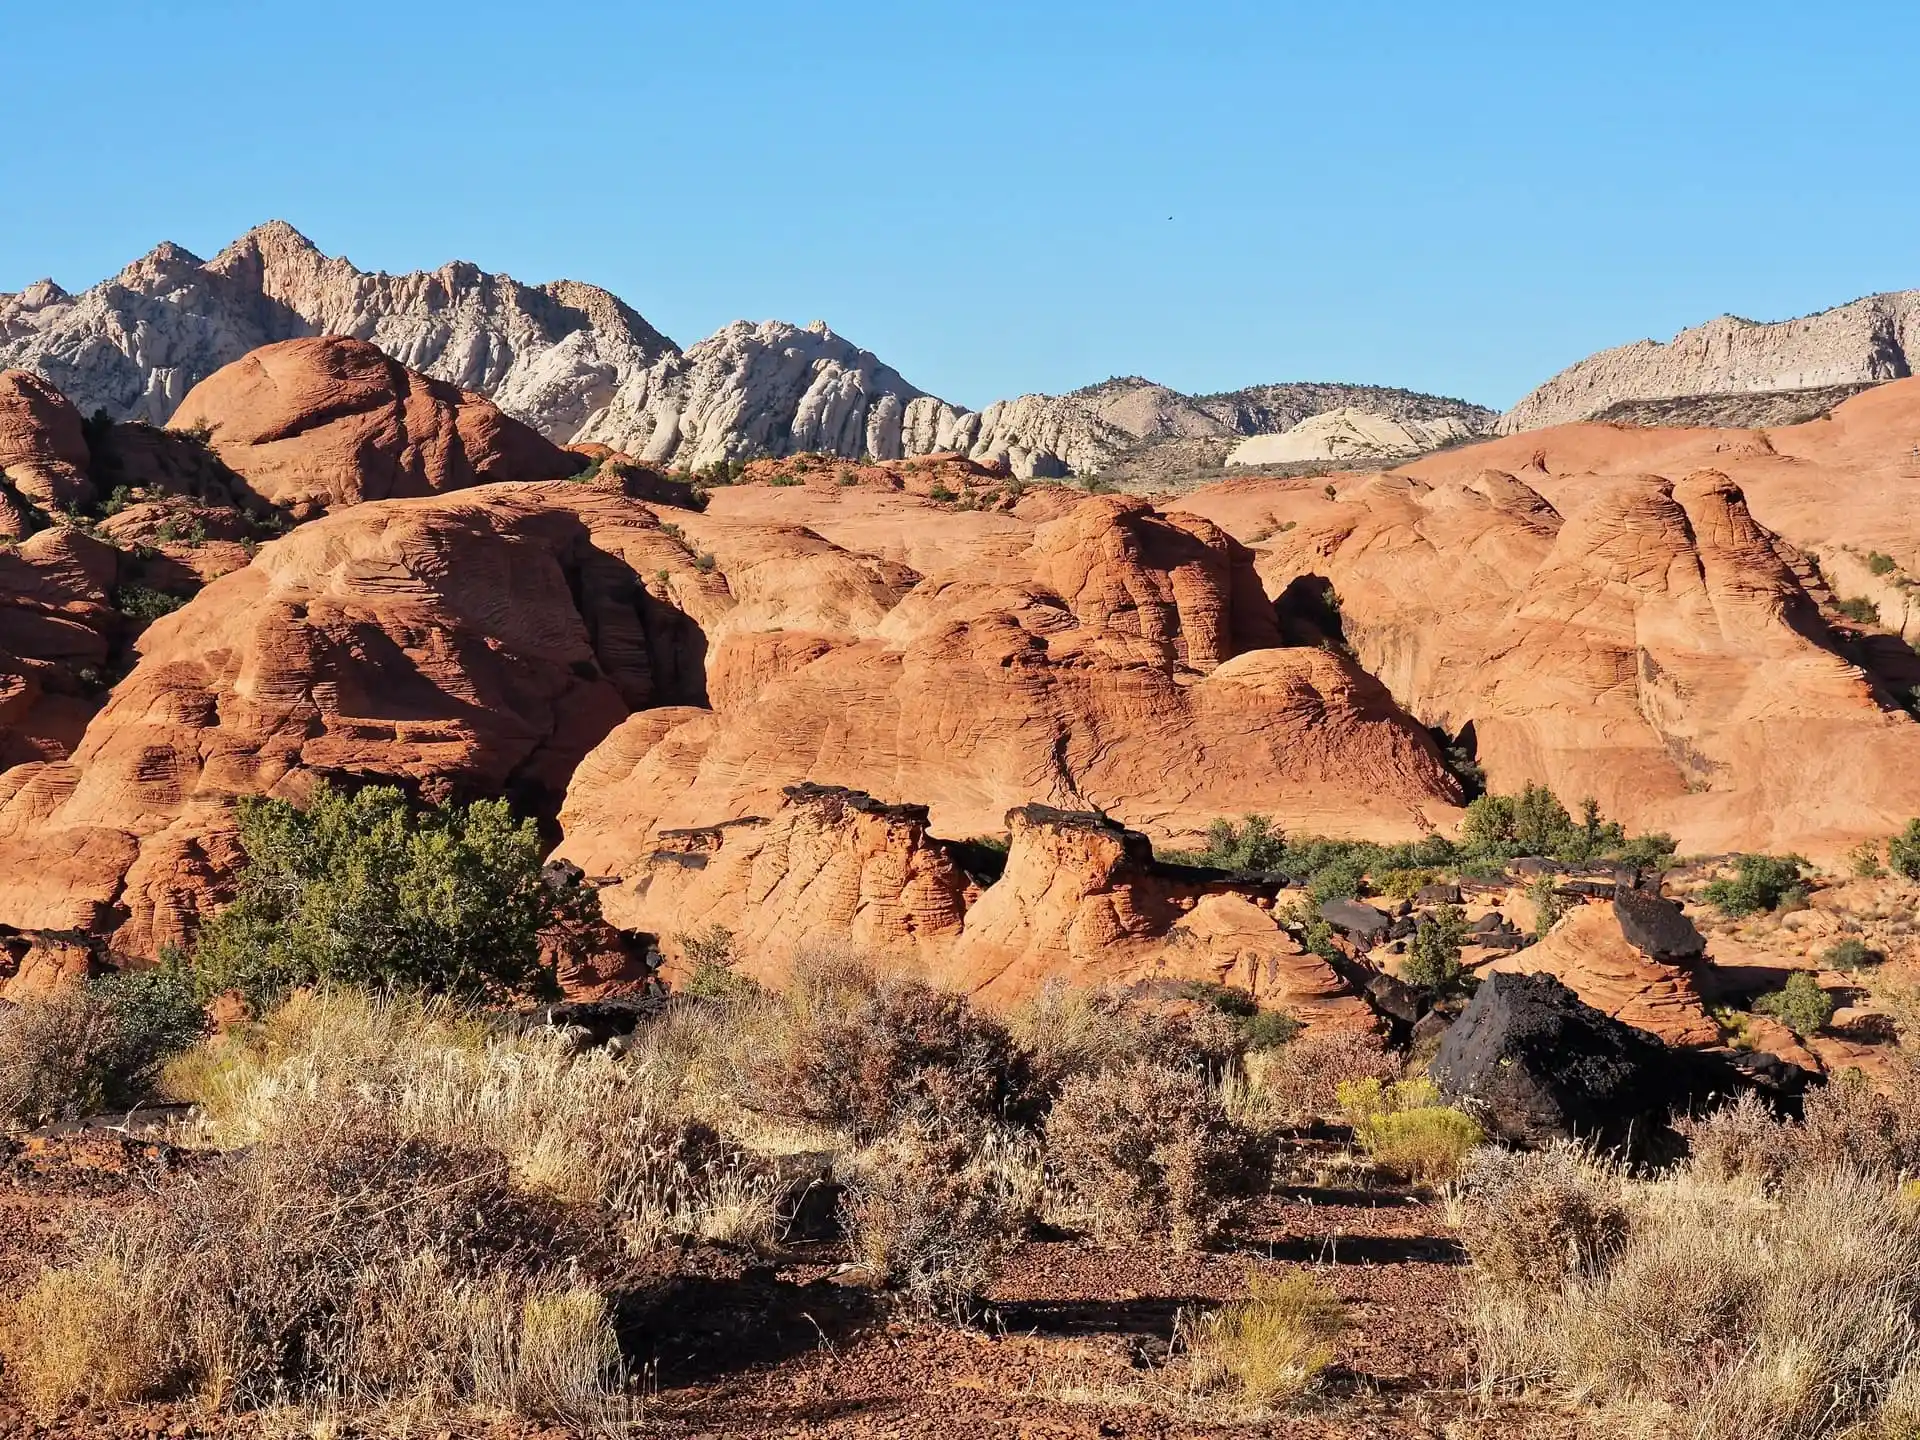 Snow Canyon State Park is full of amazing sandstone and lava formations